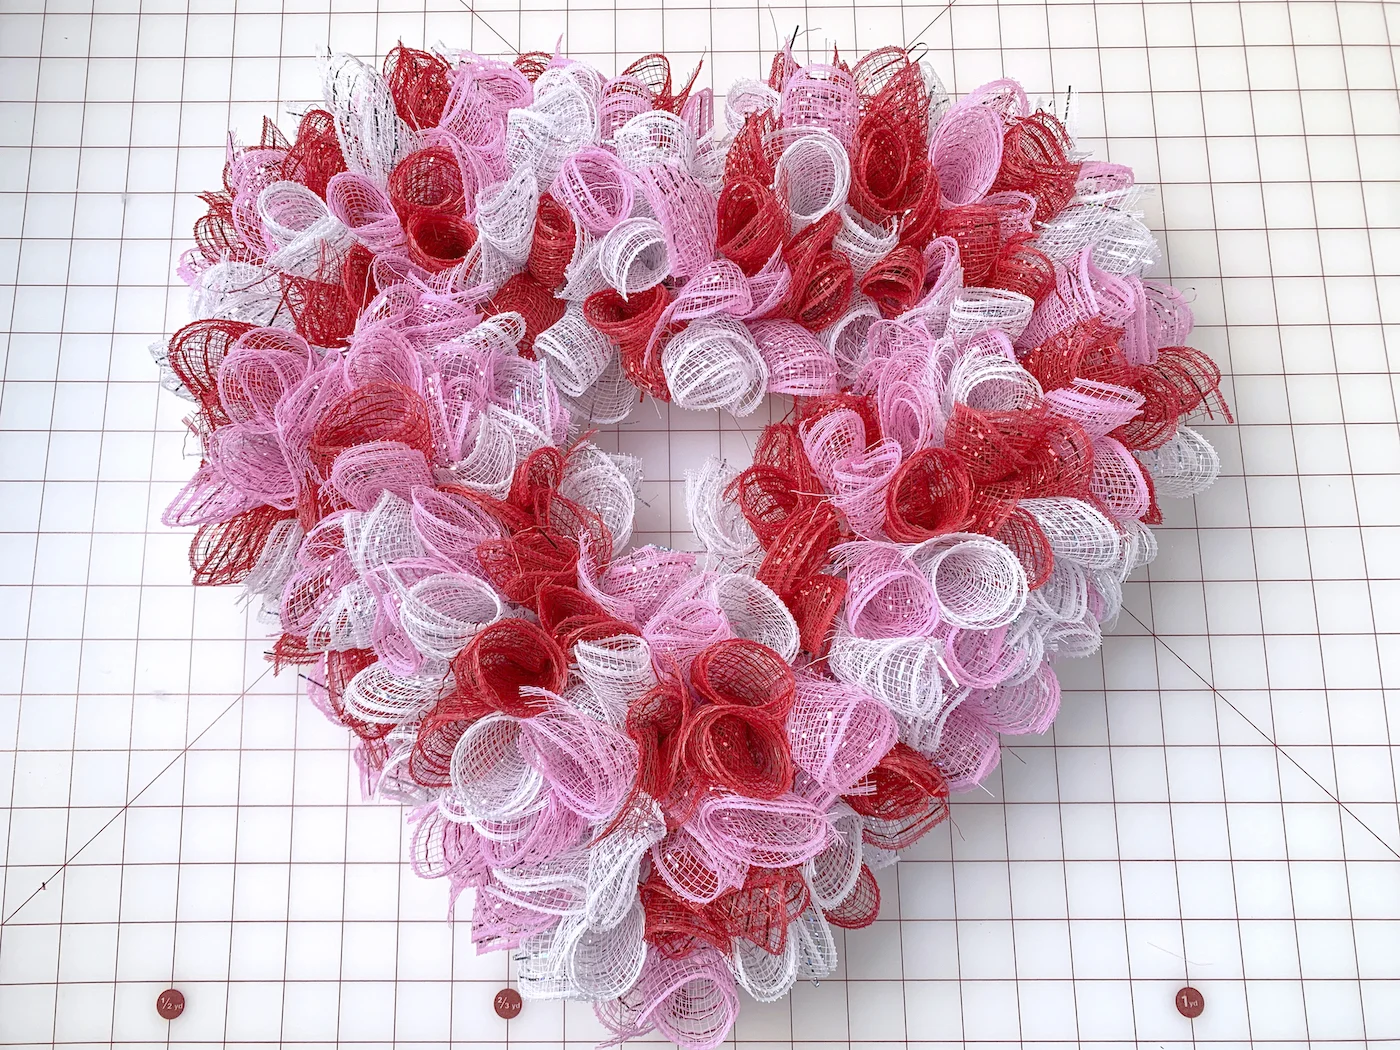 completed heart shaped deco mesh wreath